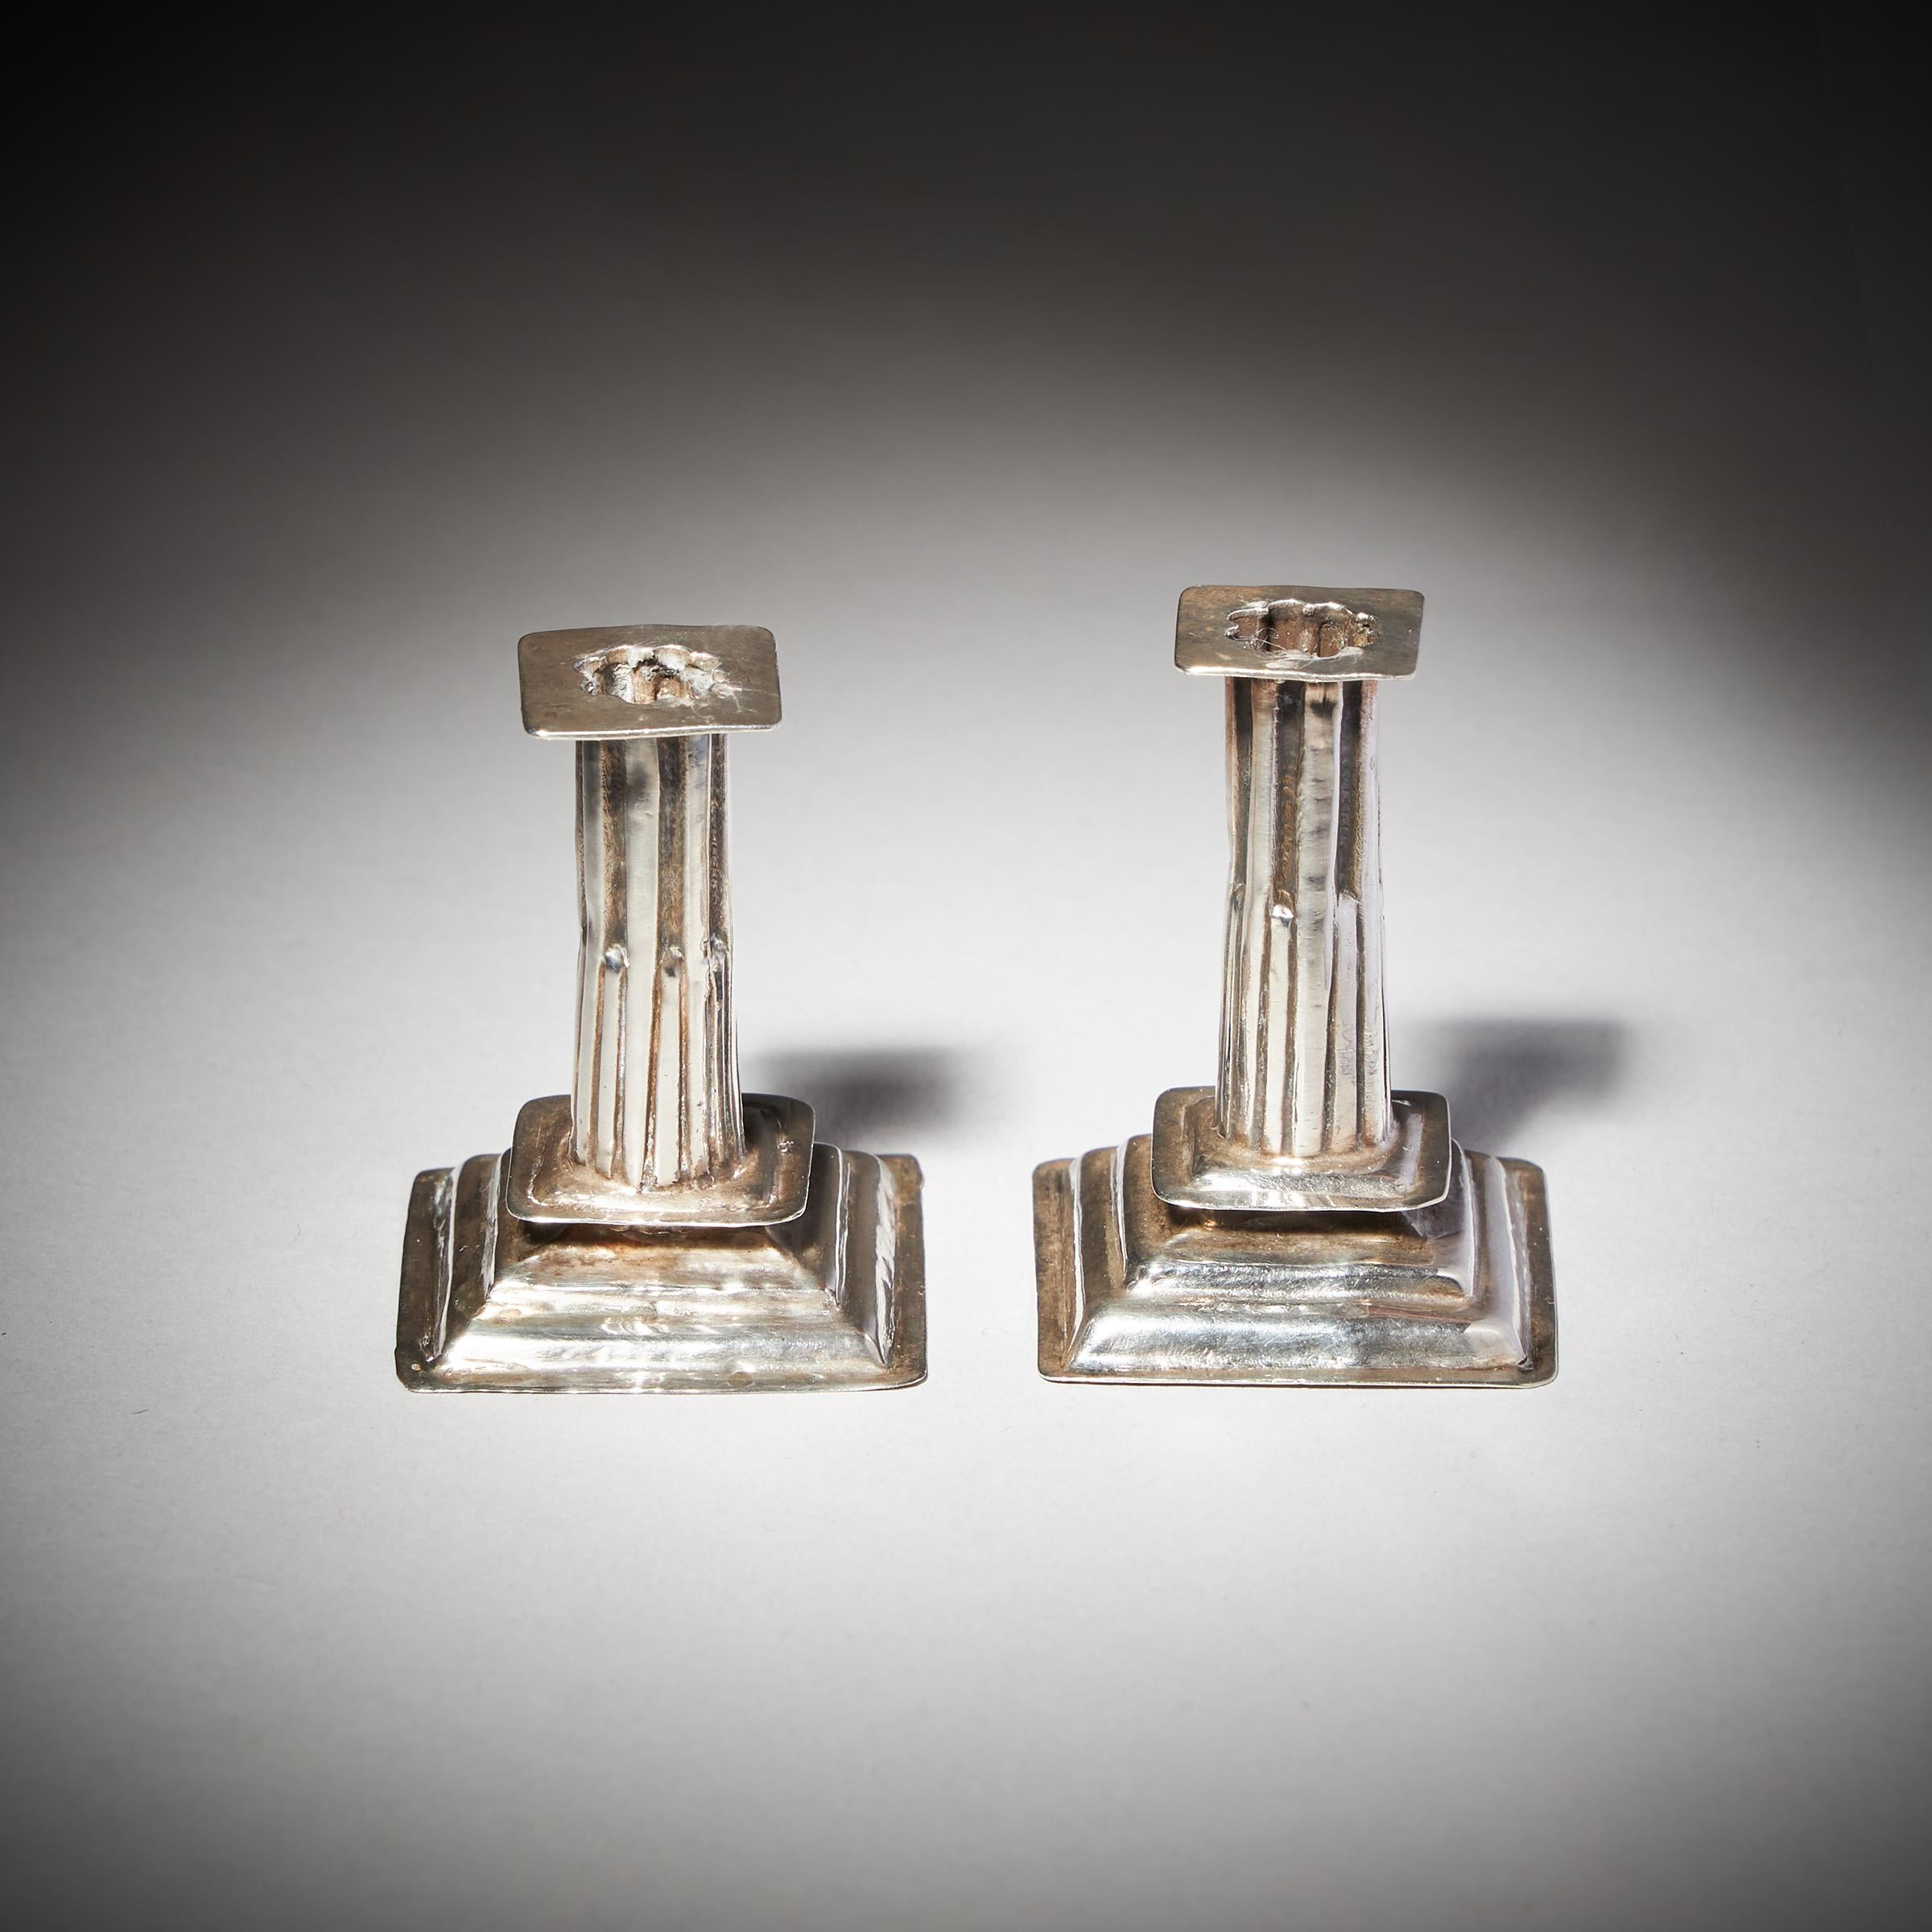 English A Pair of 17th Century William and Mary Miniature Candlesticks By George Manjoy For Sale